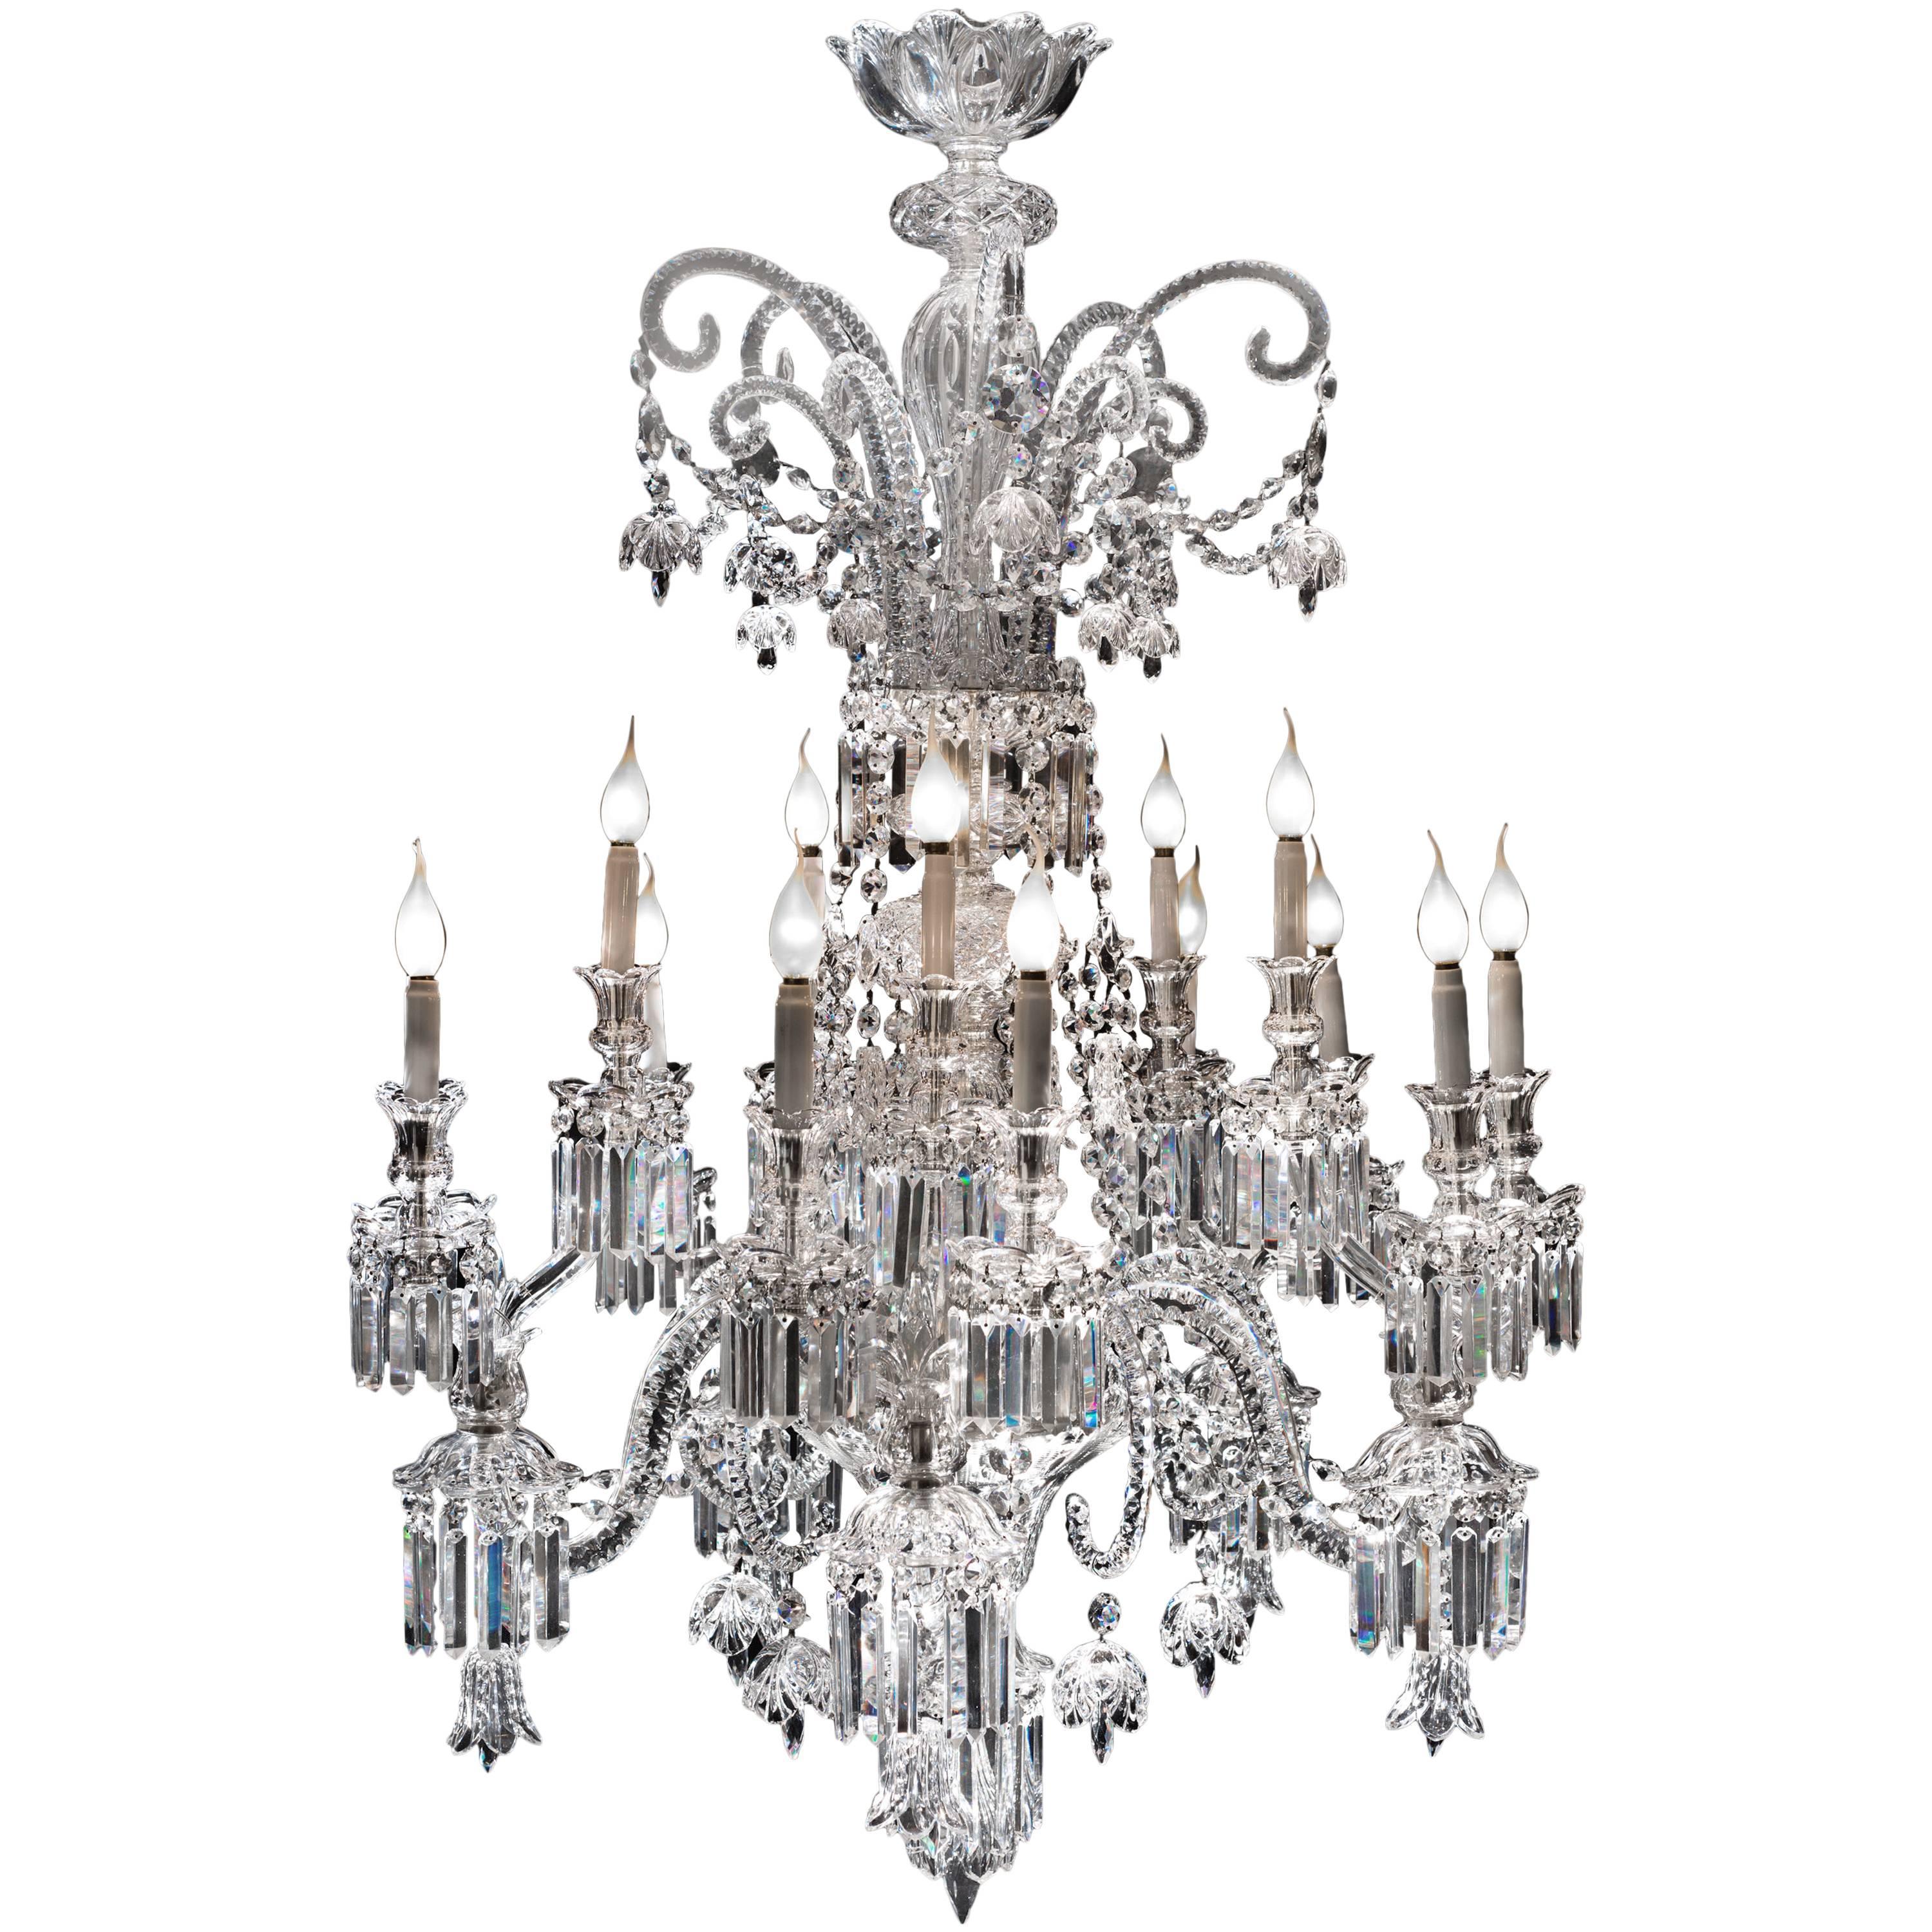 Exceptional Crystal Chandelier of Baccarat, France, 1820s